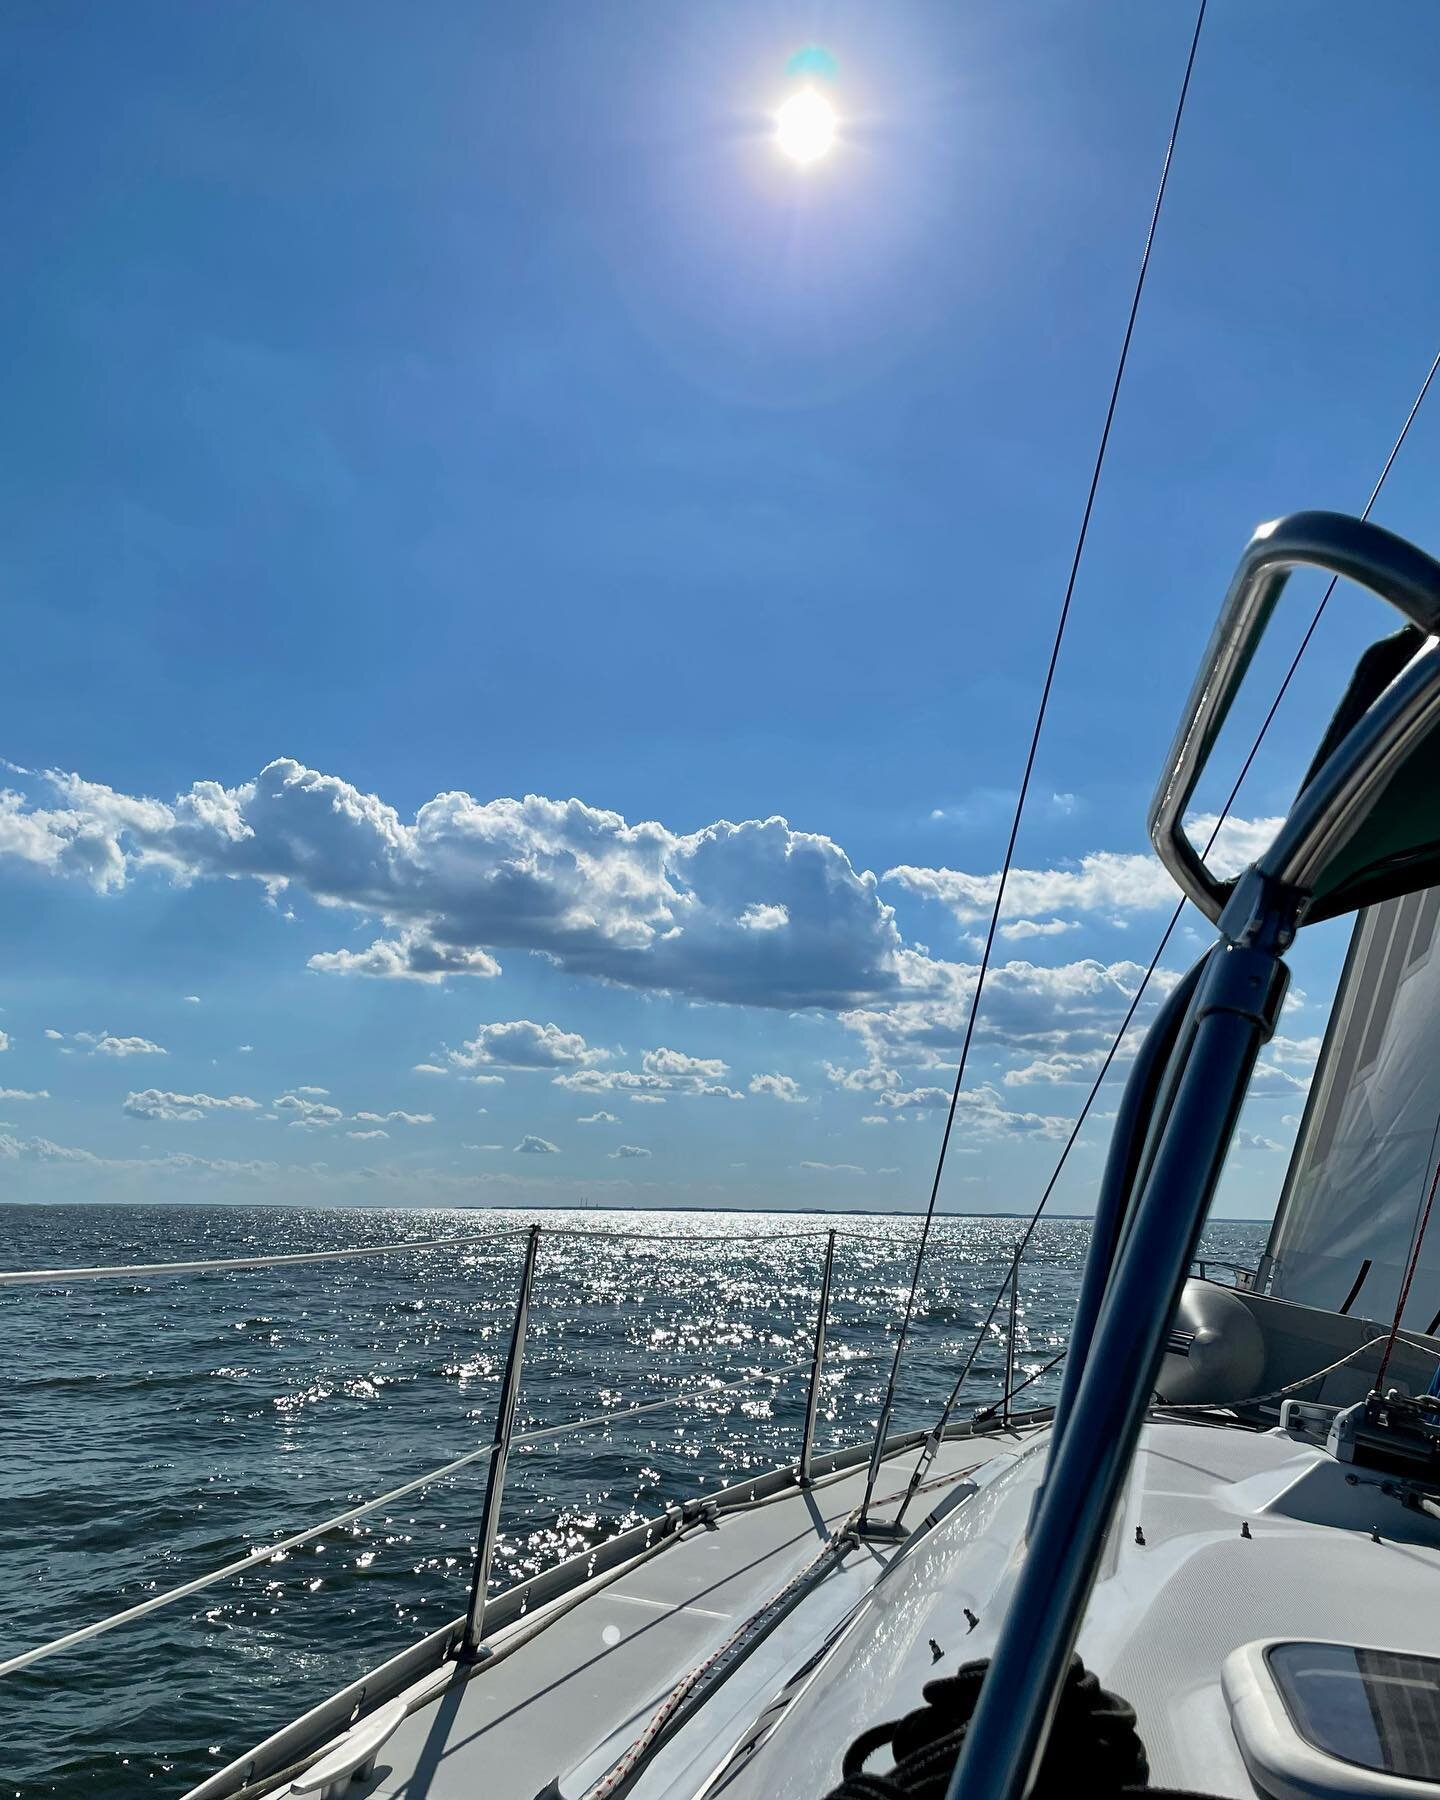 Beautiful August days on the Chesapeake with @djsynch.  We sailed south just past Pool&rsquo;s Island to catch one last glimpse of the C.P. Crane Coal Powered Plant in Bowley's Quarters before it was imploded on Friday morning at 8:00 AM.  After sayi